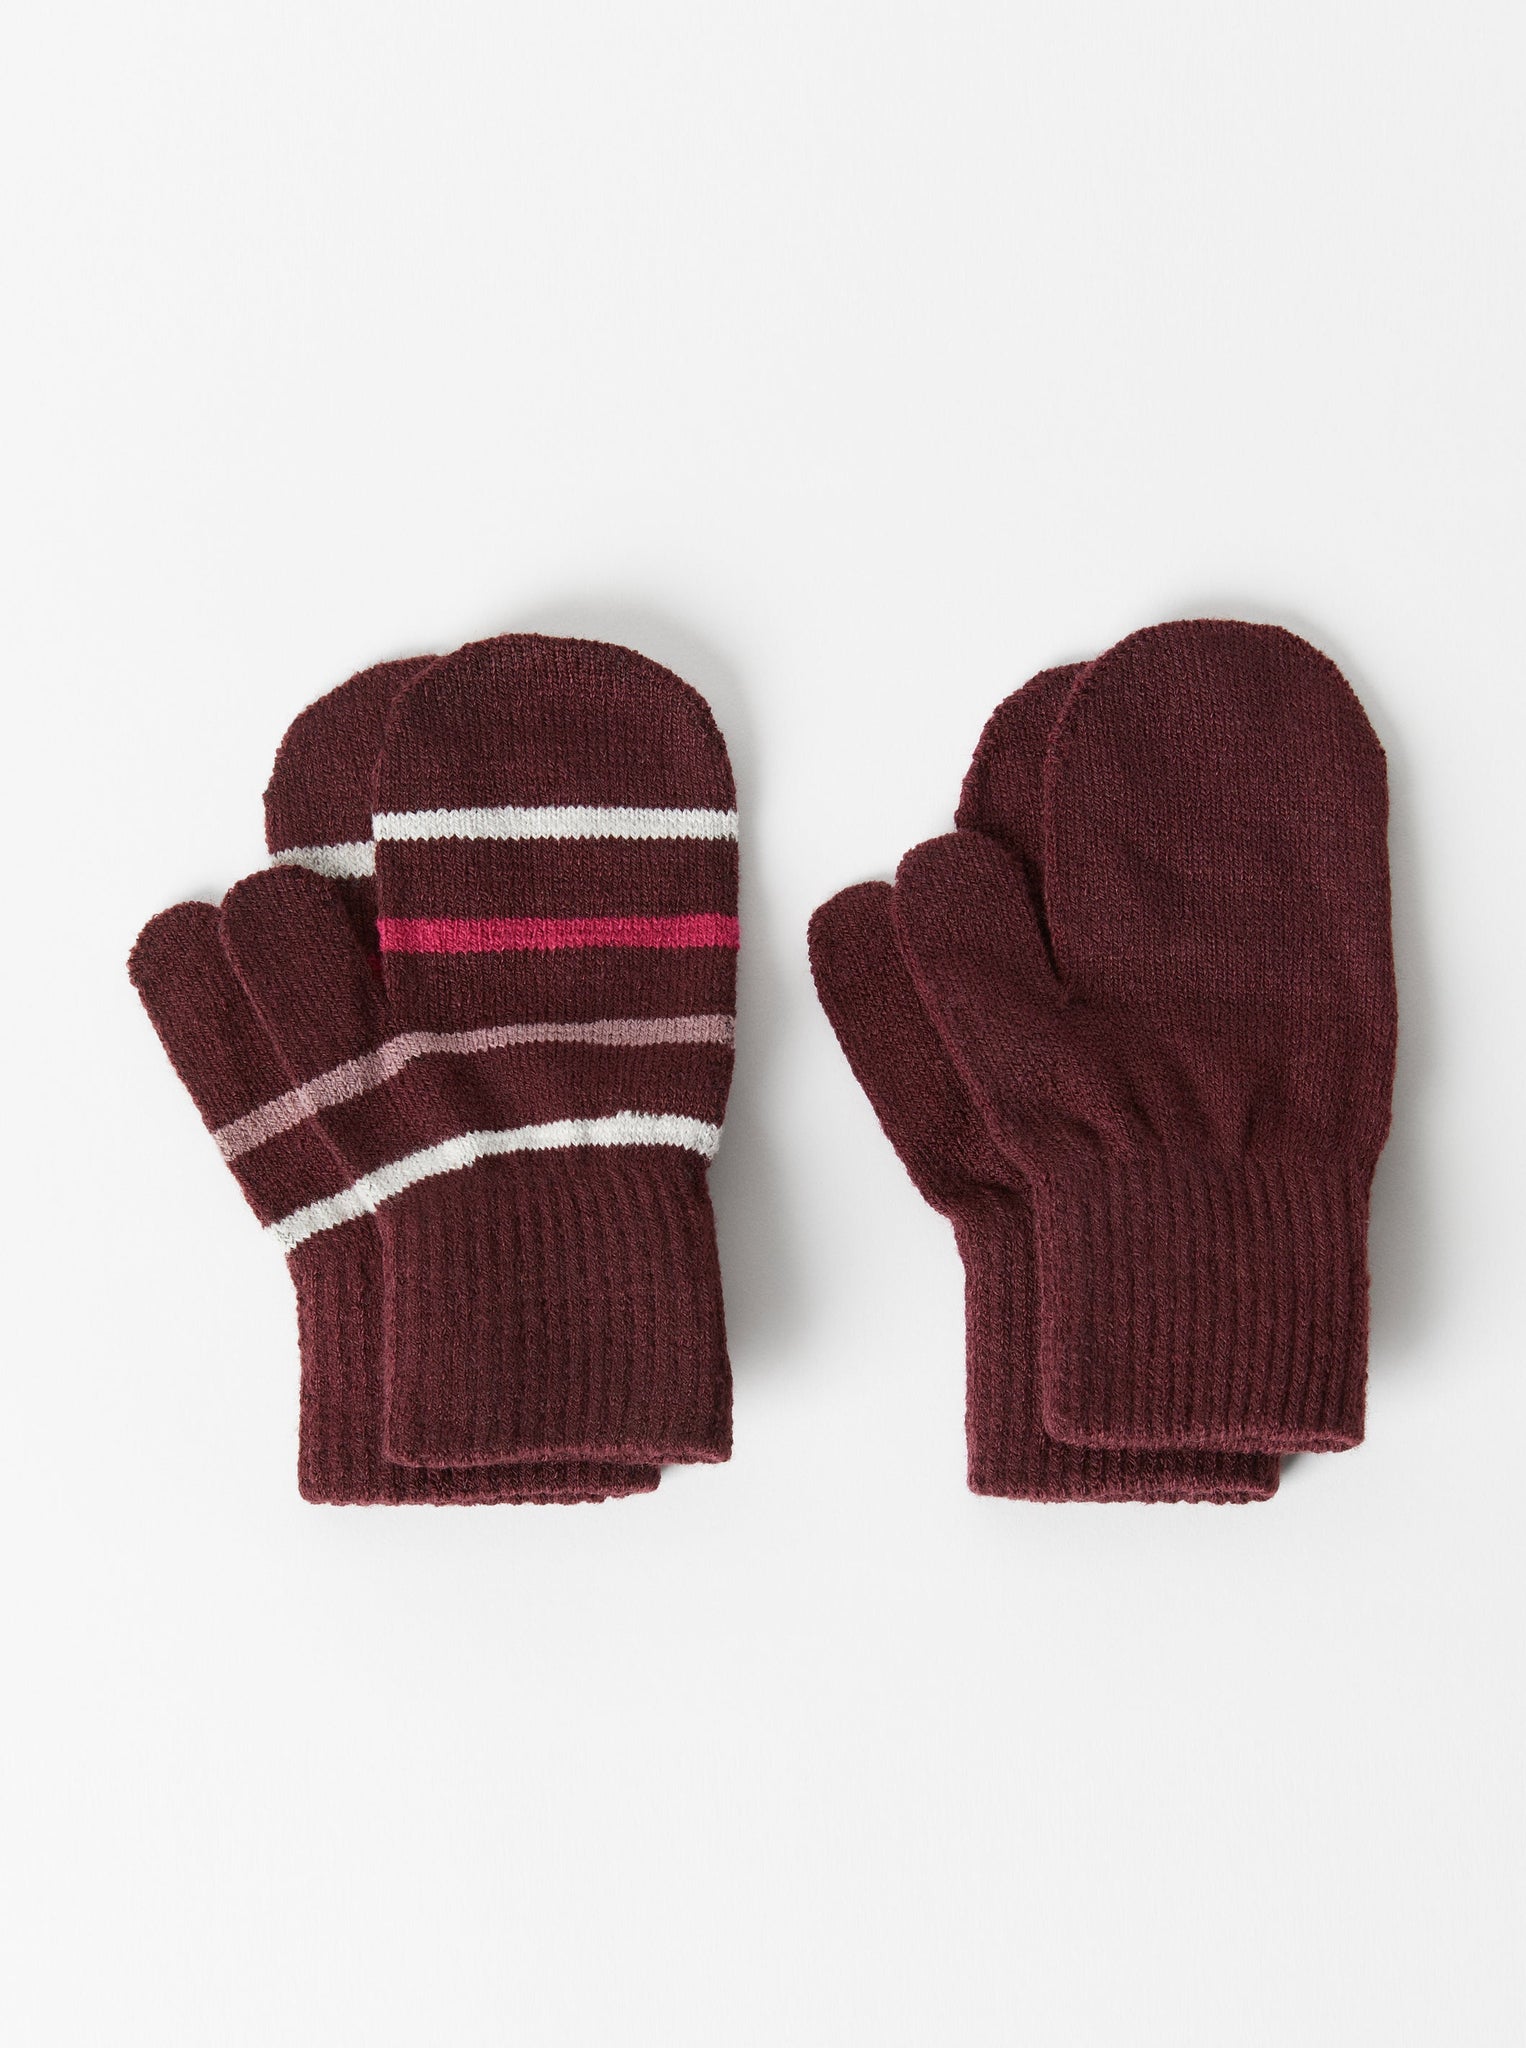 Burgundy Magic Kids Mittens Multipack from the Polarn O. Pyret kidswear collection. The best ethical kids outerwear.